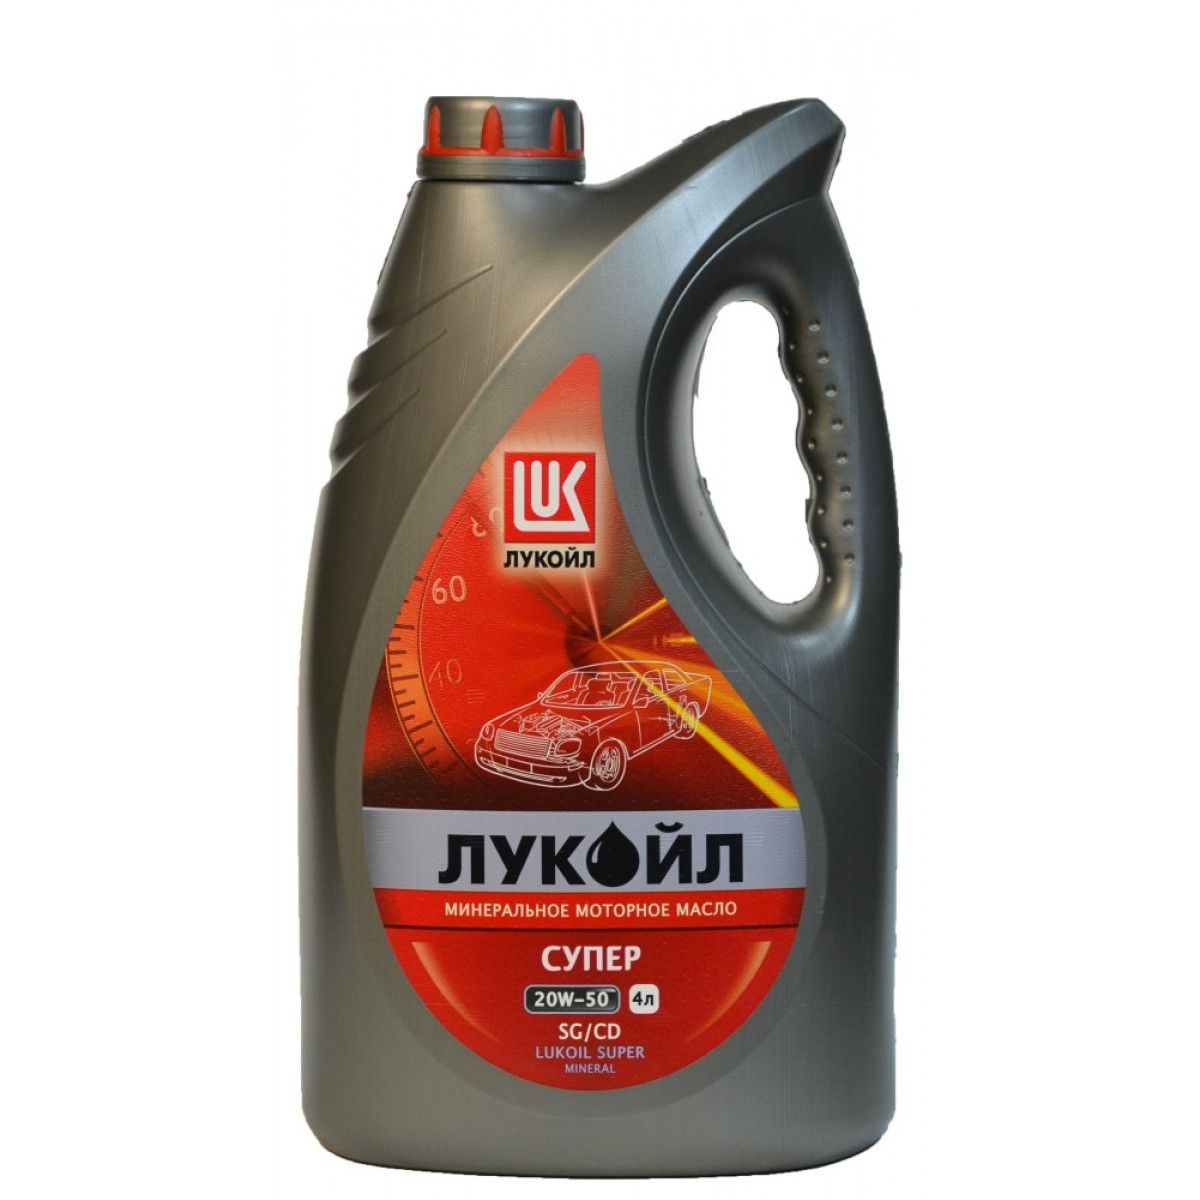 Масло w 50. Масло Лукойл 20w50. Масло Лукойл 20w50 для мотоциклов. Lukoil super 20w-50. Масло Лукойл 4т 20w50 для мотоциклов.